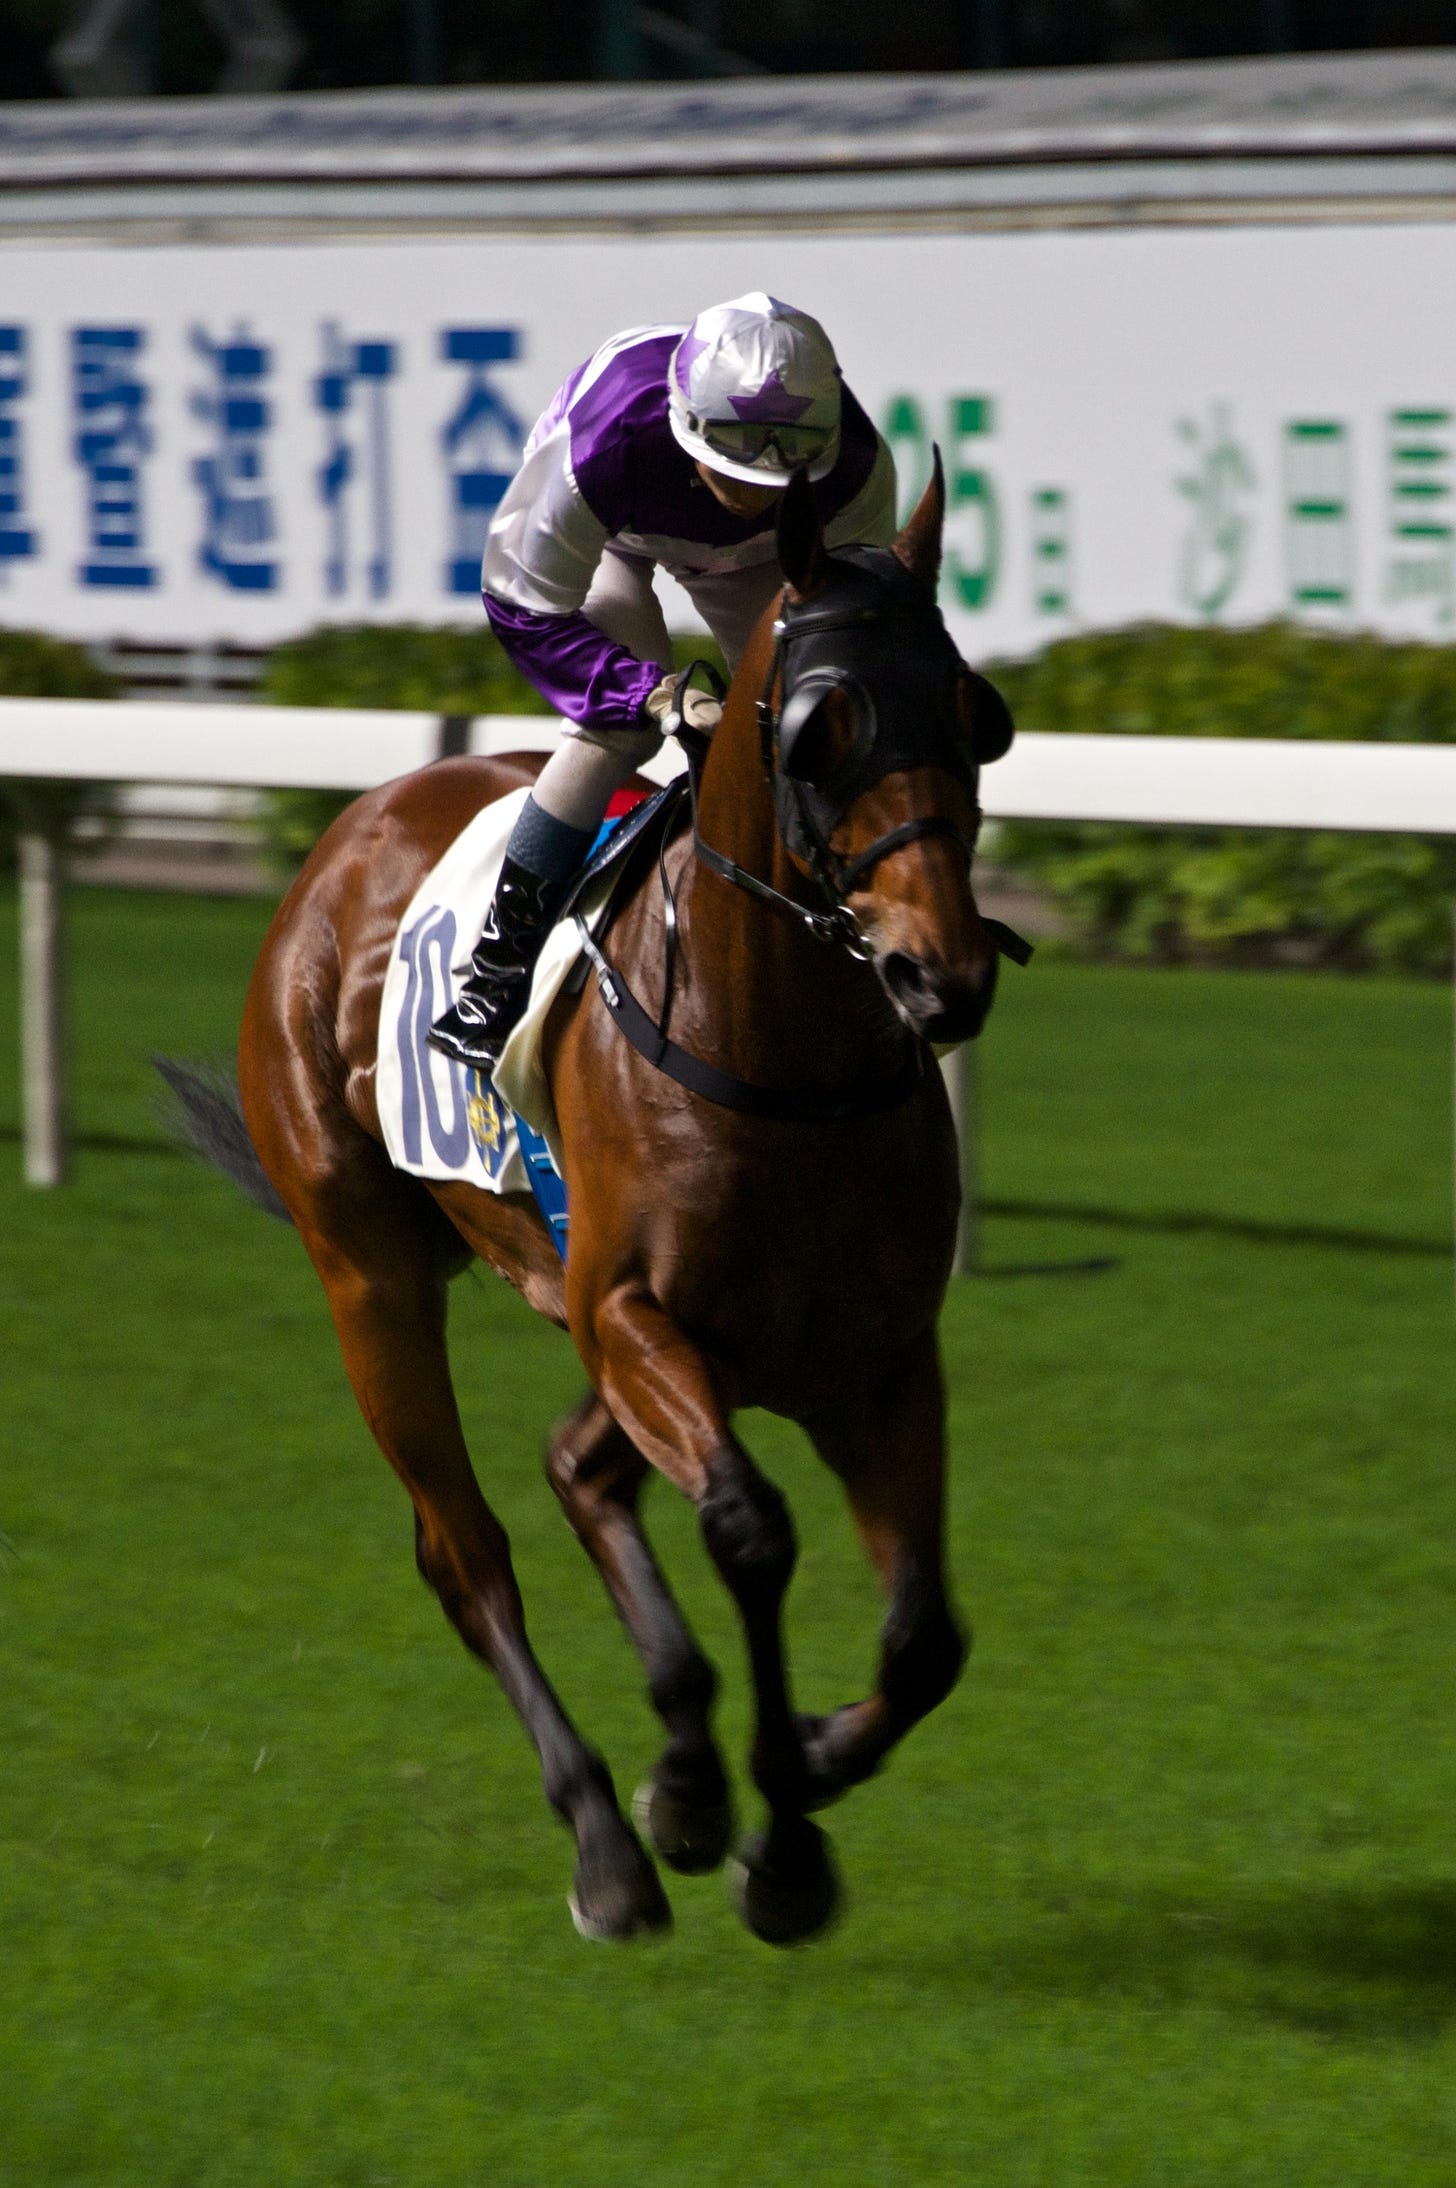 Jockey in purple and white riding racehorse